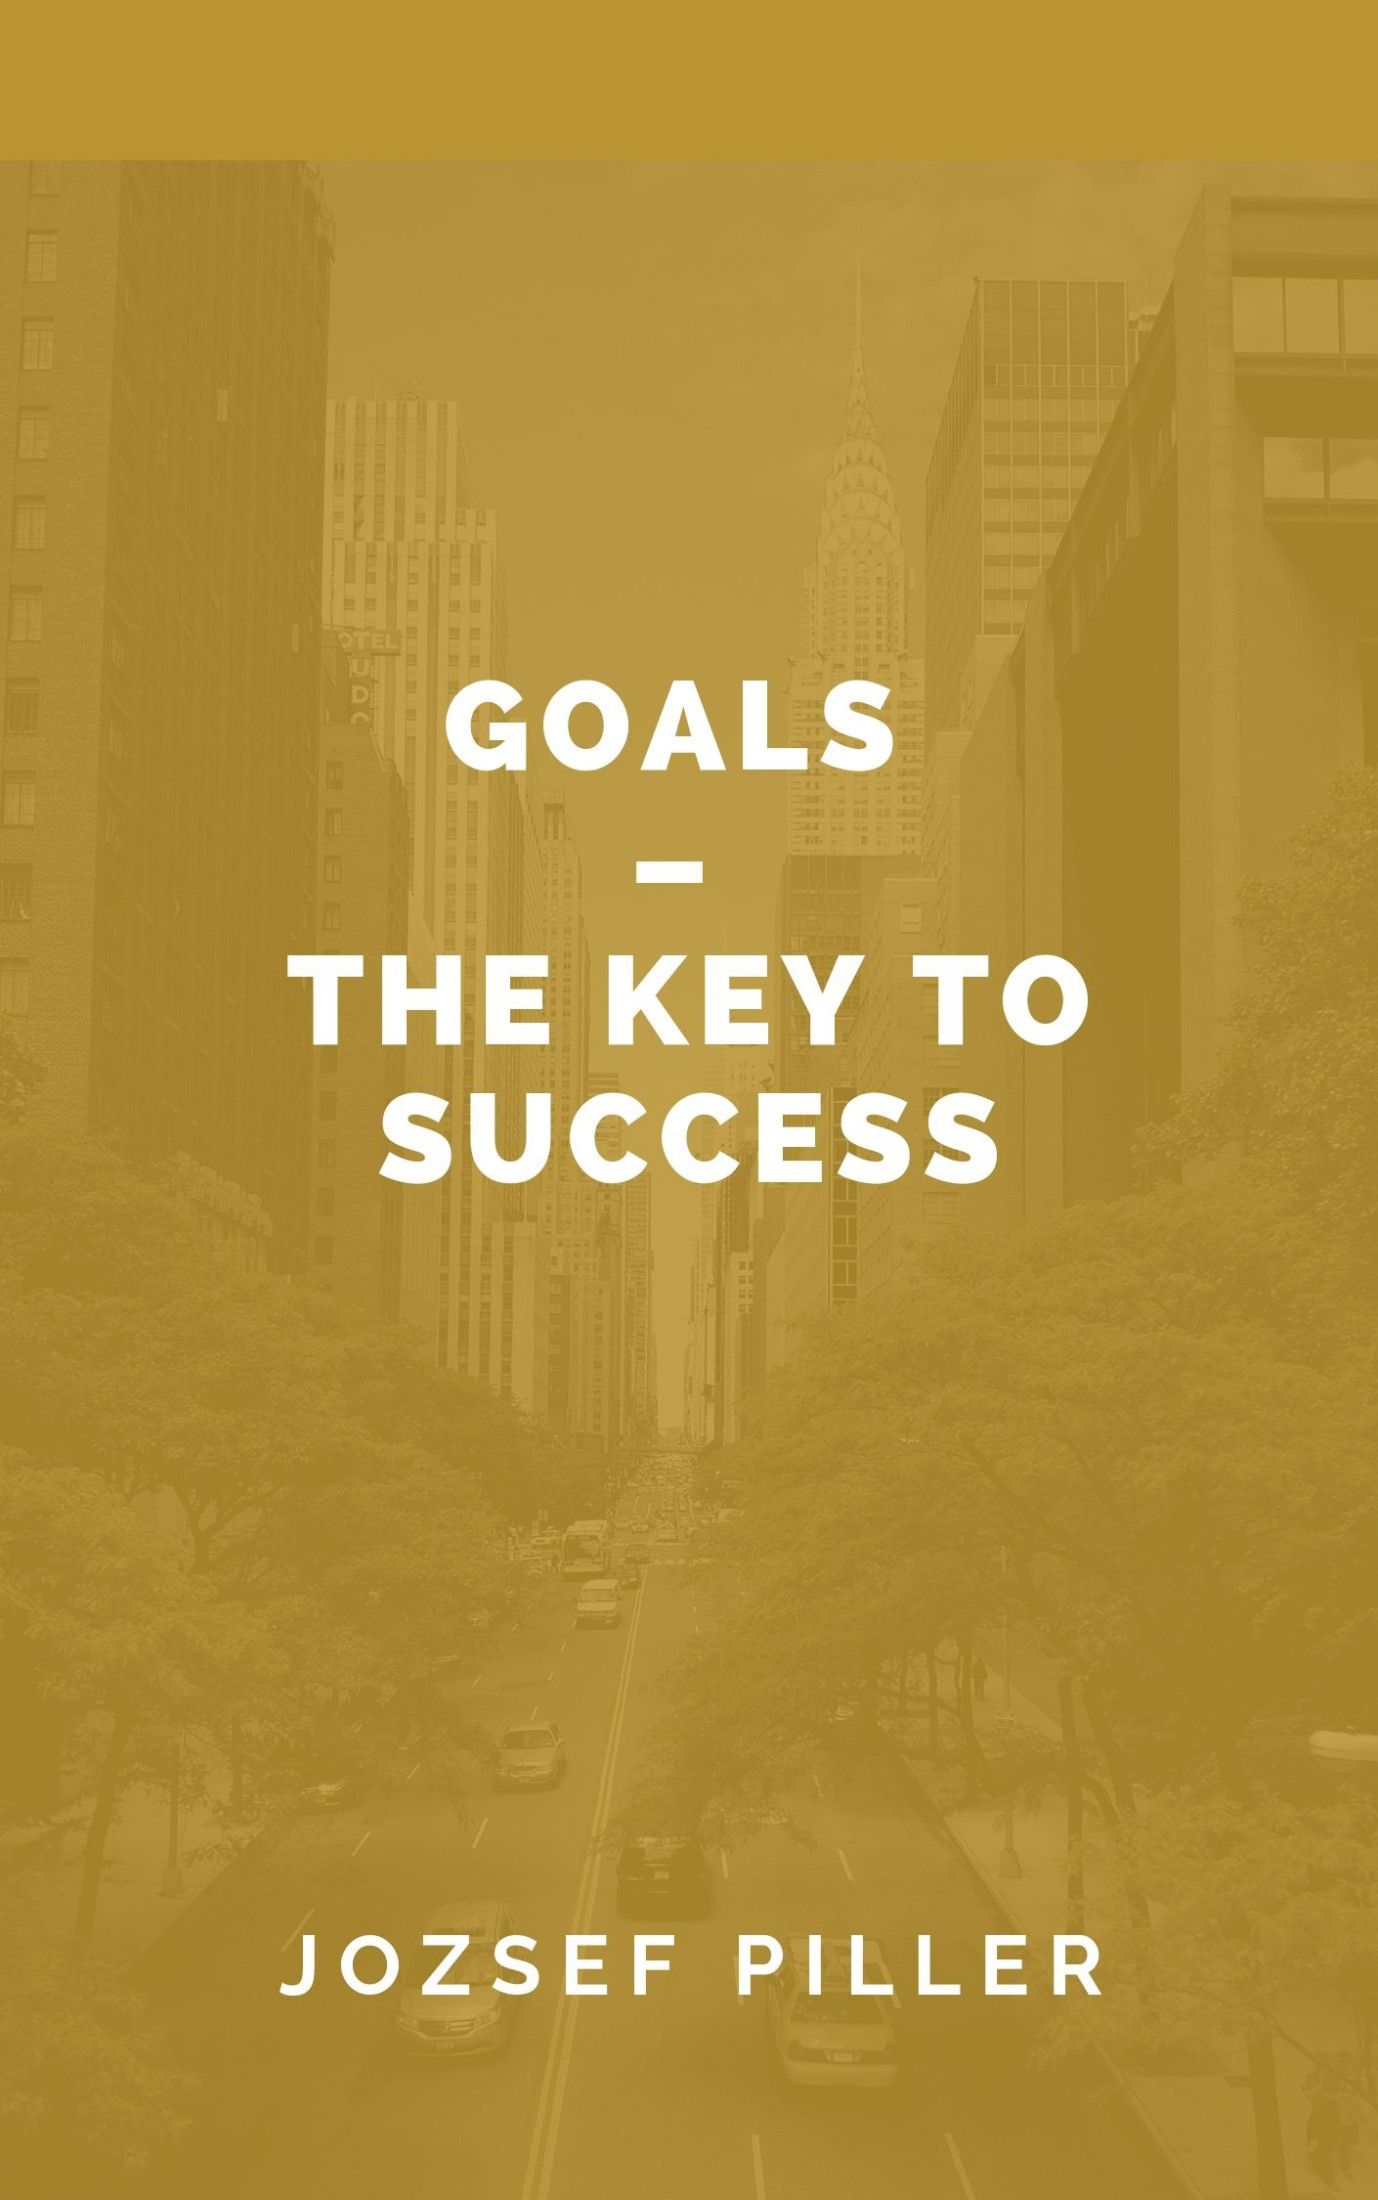 Goals – The Key to Success, eBook by Jozsef Piller